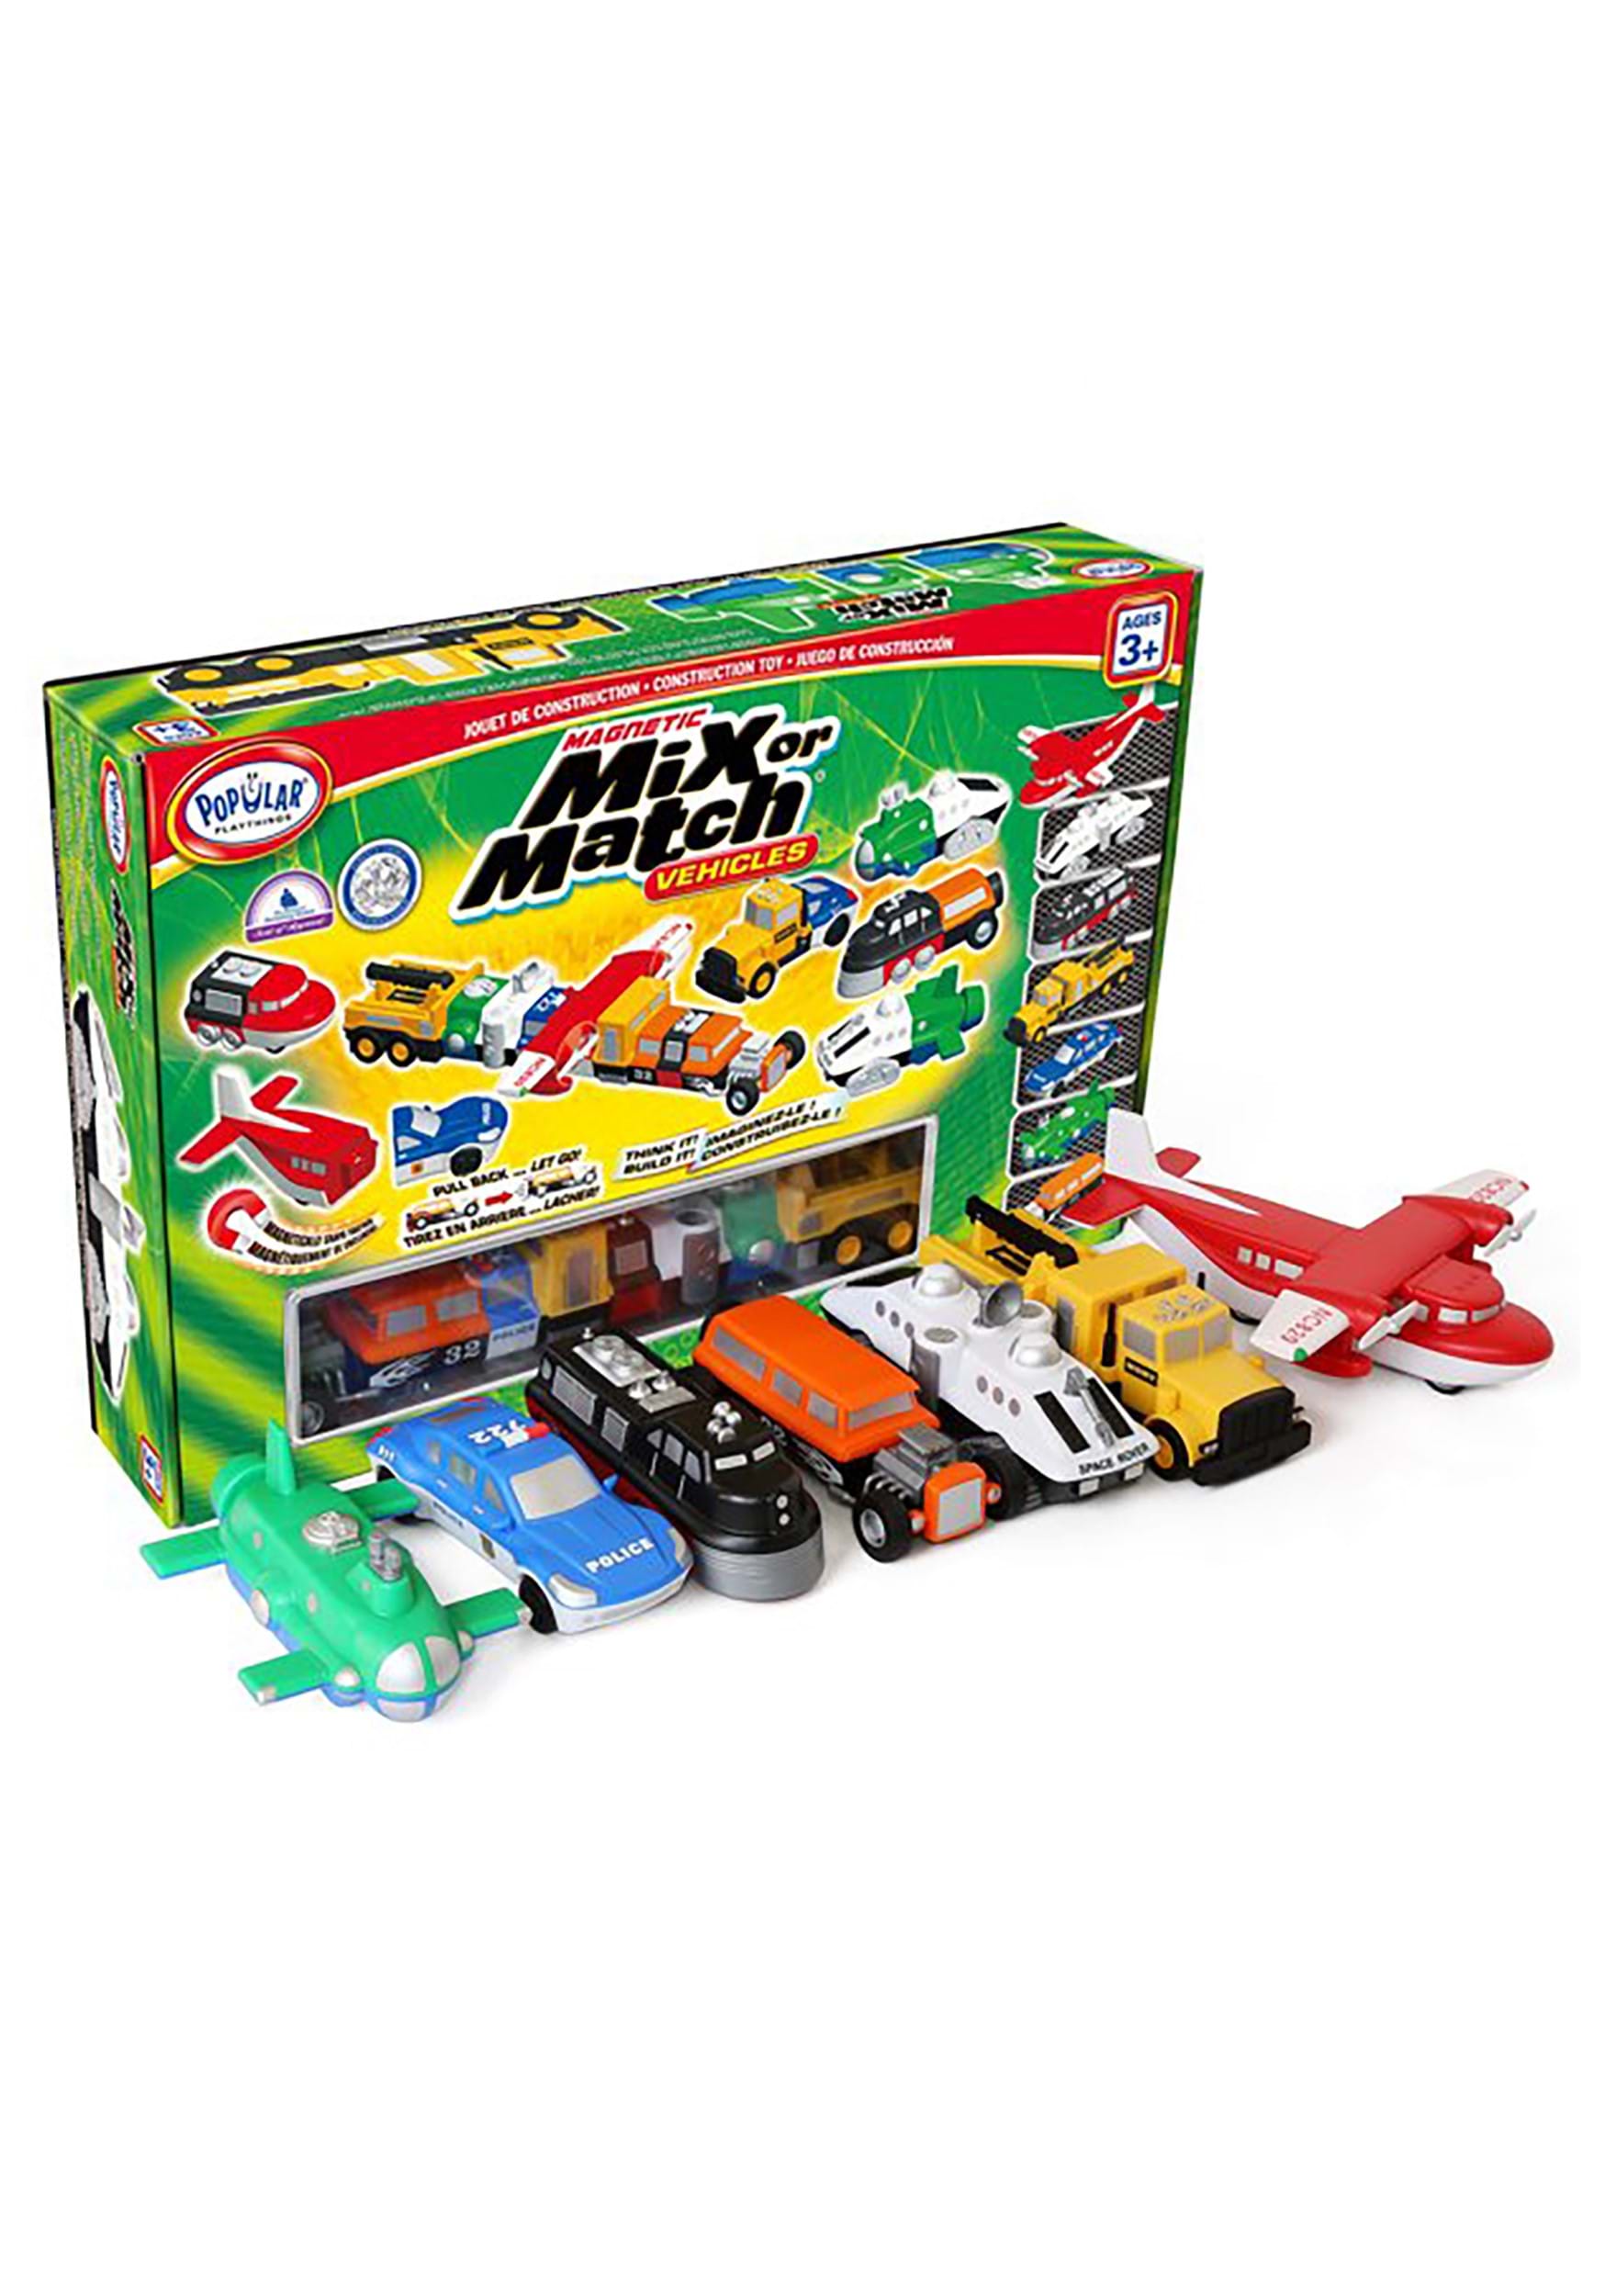 Popular Playthings Mix or Match Vehicles Deluxe